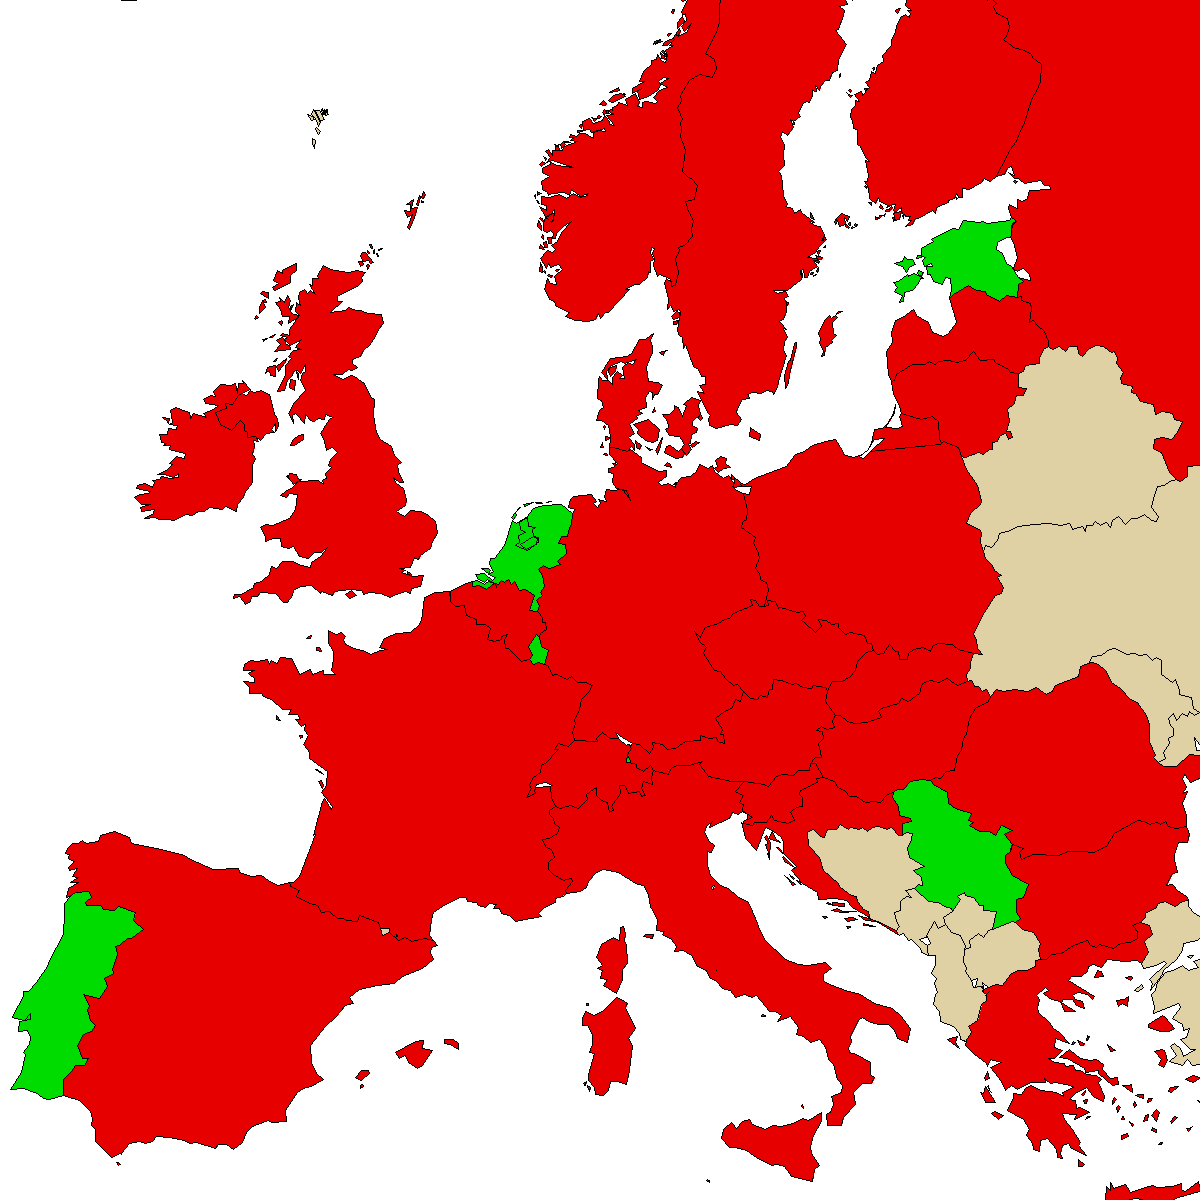 legal info map for our product 3CMC, green are countries where we found no ban, red with ban, grey is unknown